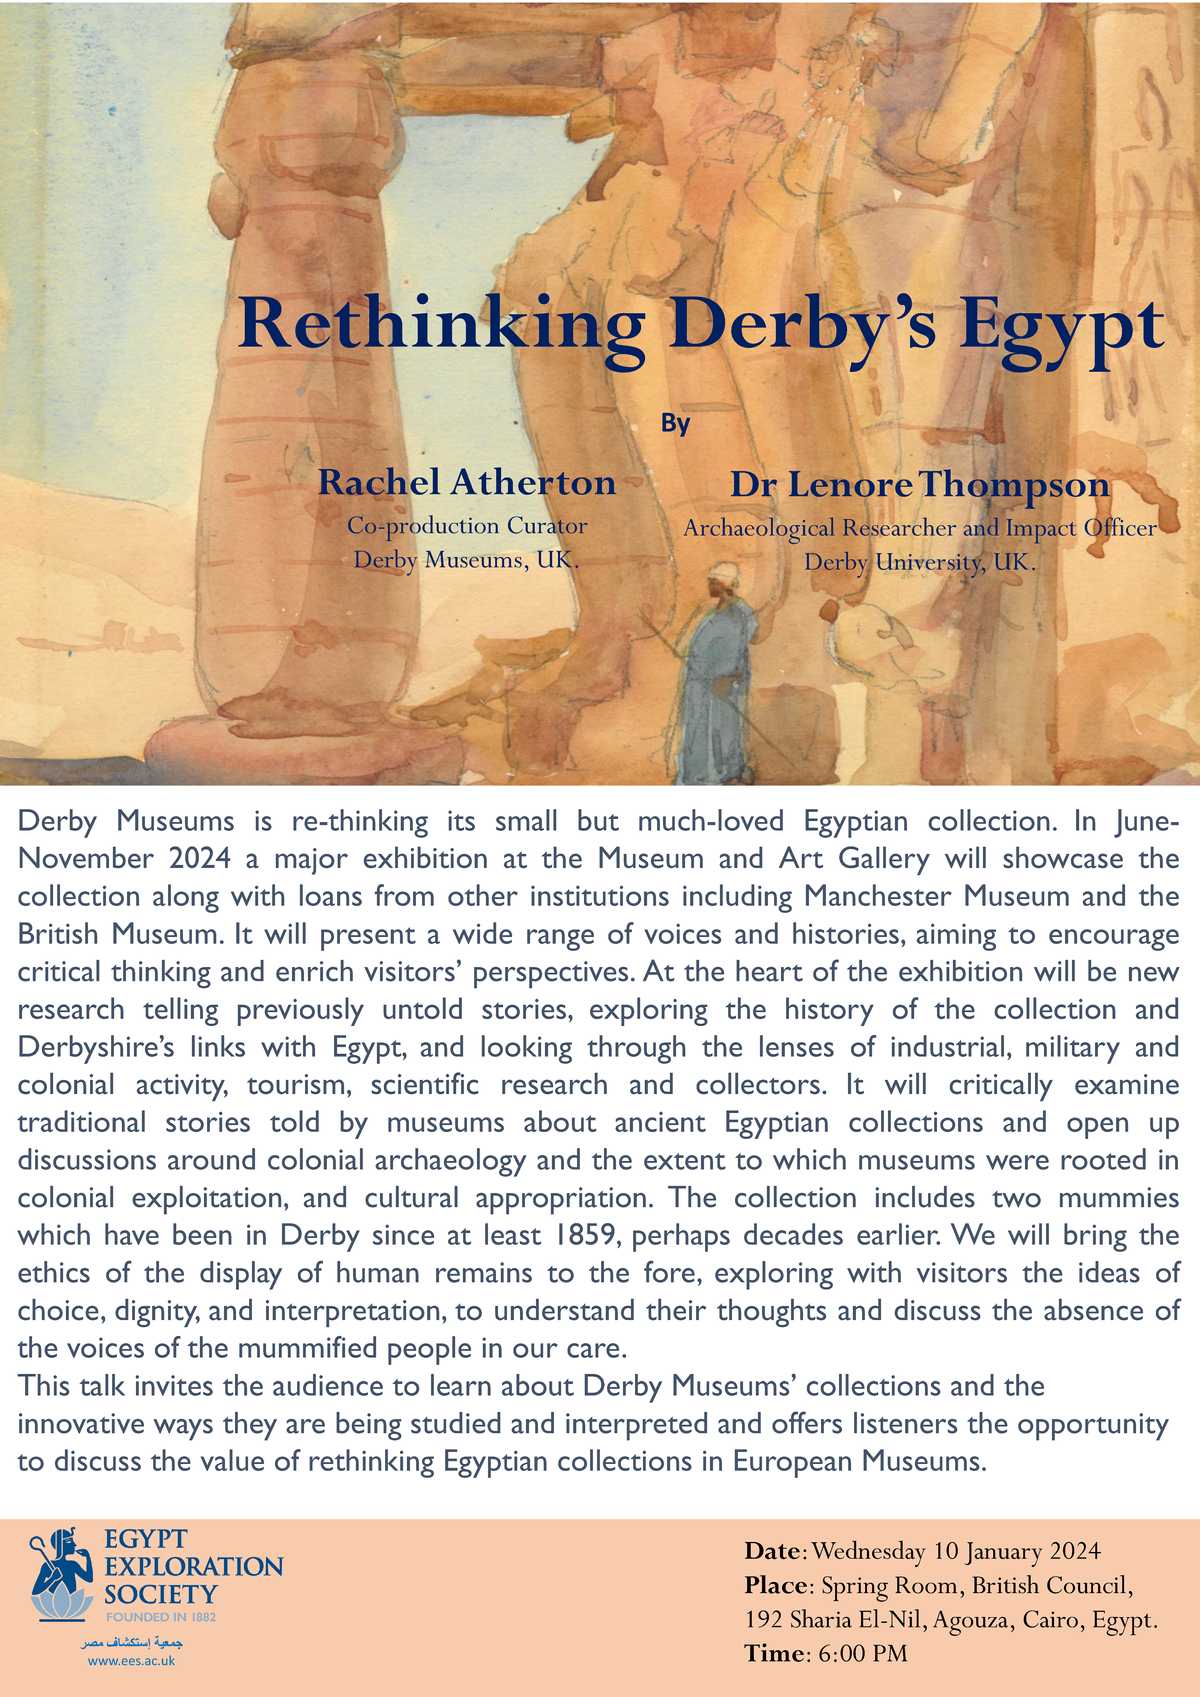 24 01 10 Atherton and Thompson_Rethinking Derby’s Egypt.png